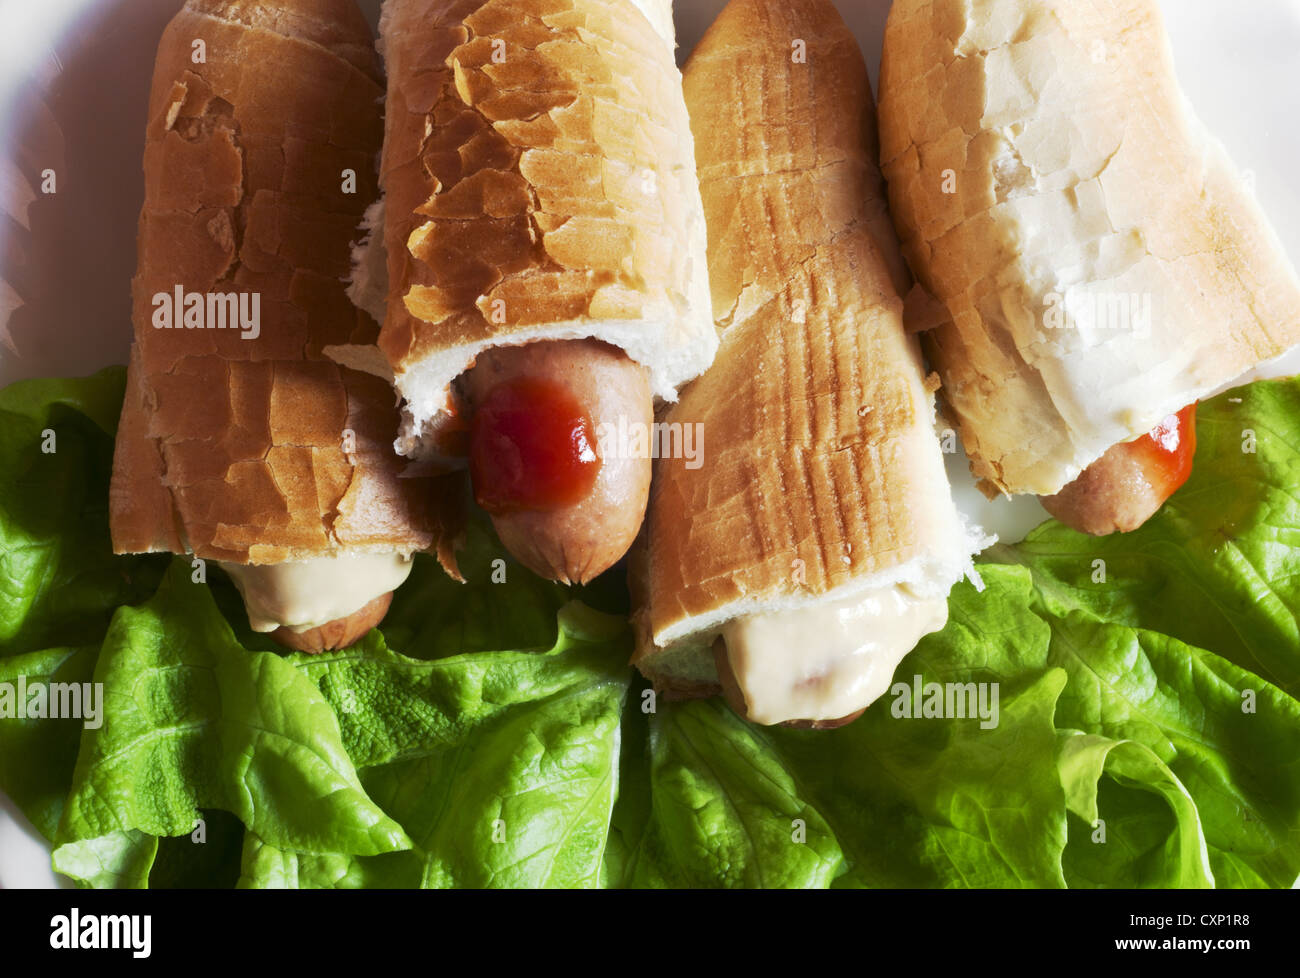 Hot dogs with salad for breakfast Stock Photo